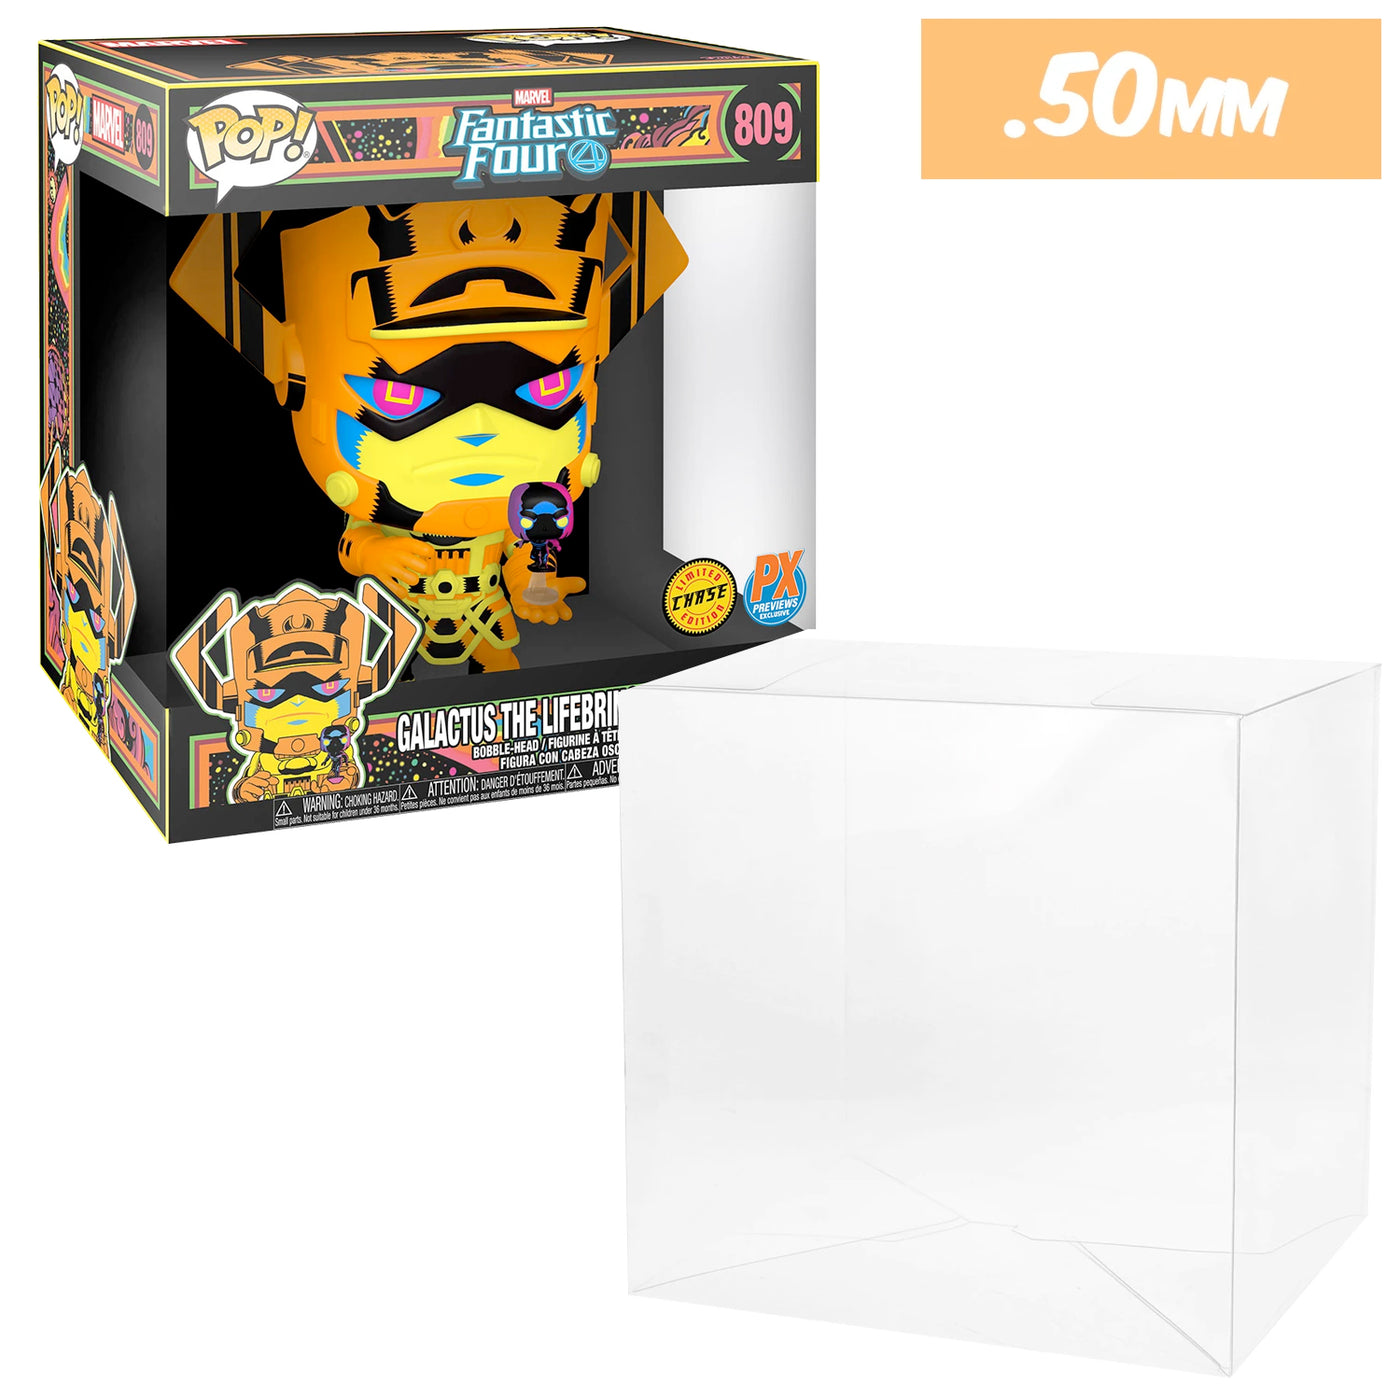 px previews blacklight chase galactus wide 10 inch best funko pop protectors thick strong uv scratch flat top stack vinyl display geek plastic shield vaulted eco armor fits collect protect display case kollector protector